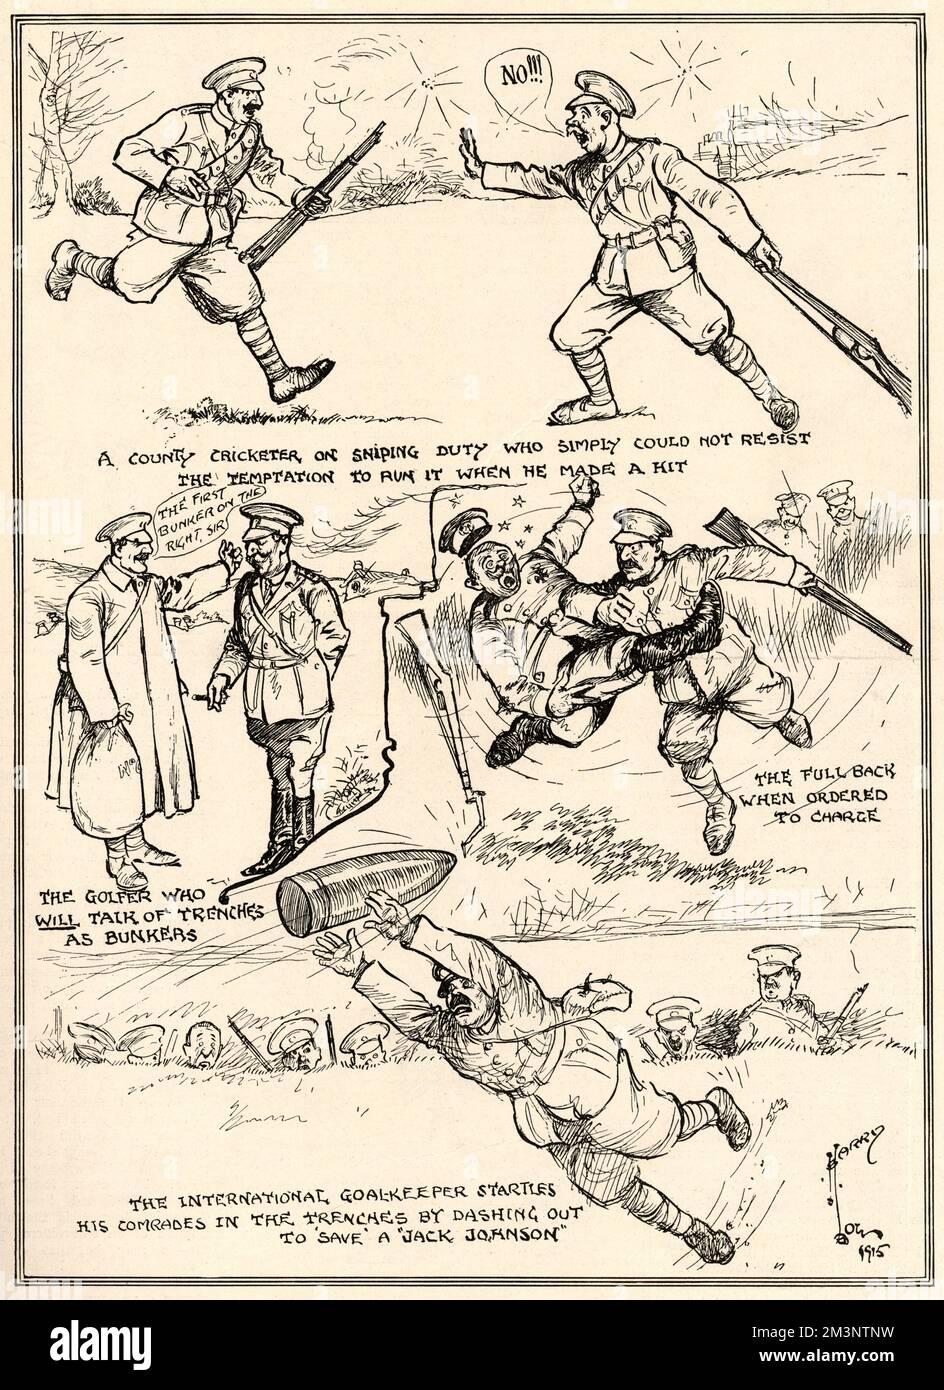 &quot;Libellous? - With a sporting battalion at the front: Highly imaginative drawings&quot;    The over-enthusiasm of Harry Low's sporting battalion certainly raises a smile. There were many such battalions, including the 1st Football Battalion (aka 17/Middlesex) and the Sportsmen's Battalion (23/Royal Fusiliers), which included two England cricketers as well as the country's lightweight boxing champion. Despite the mocking tone of this cartoon, the British greatly admired sporting ability and substantial coverage was often given to the many talented sportsmen who lost their lives, such as An Stock Photo